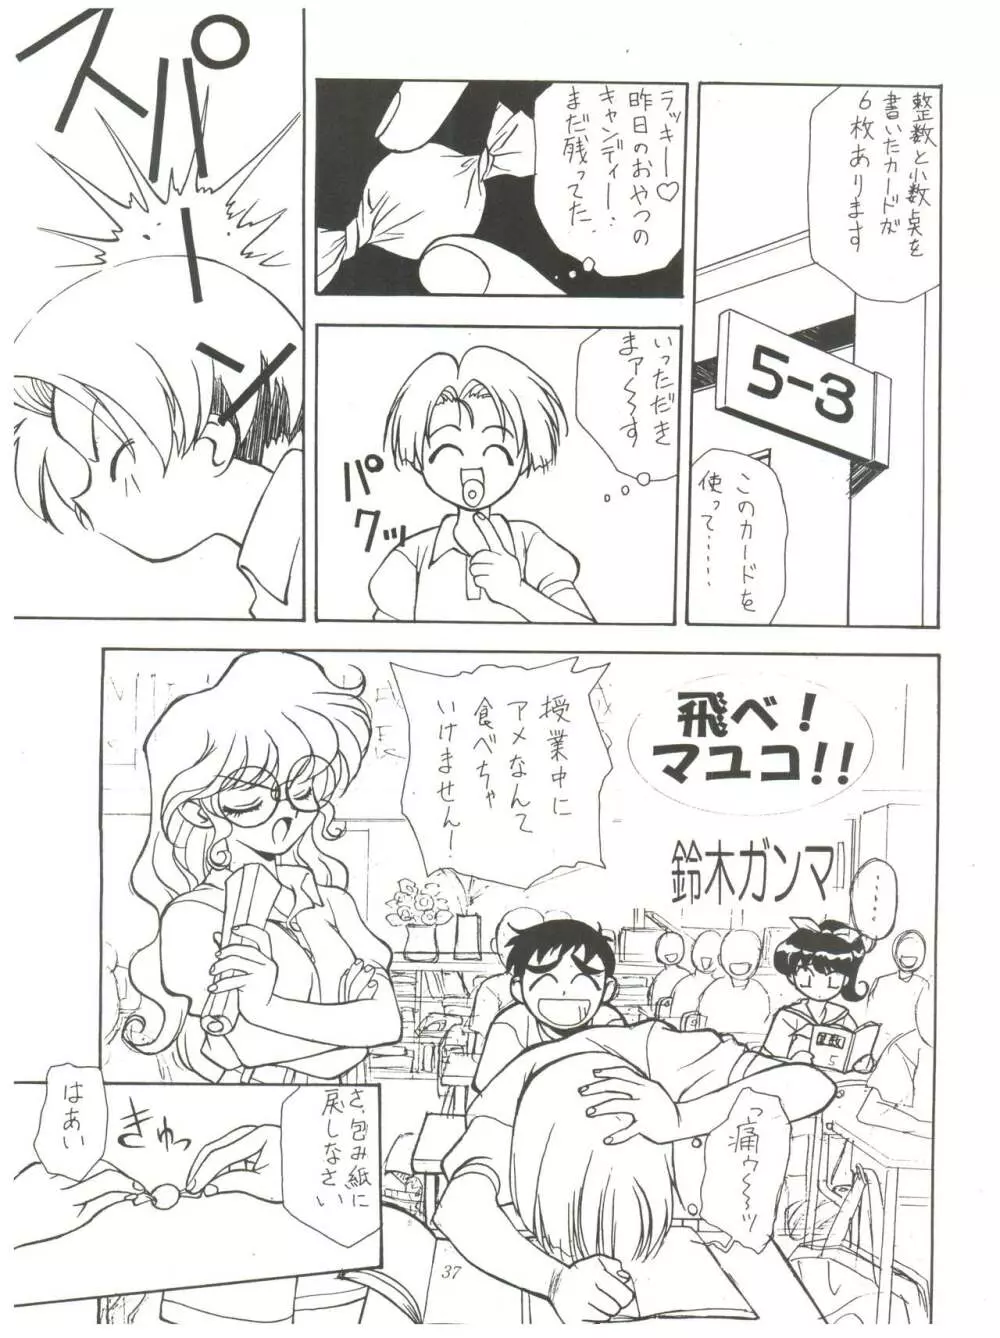 FLY! ISAMI!! Page.41